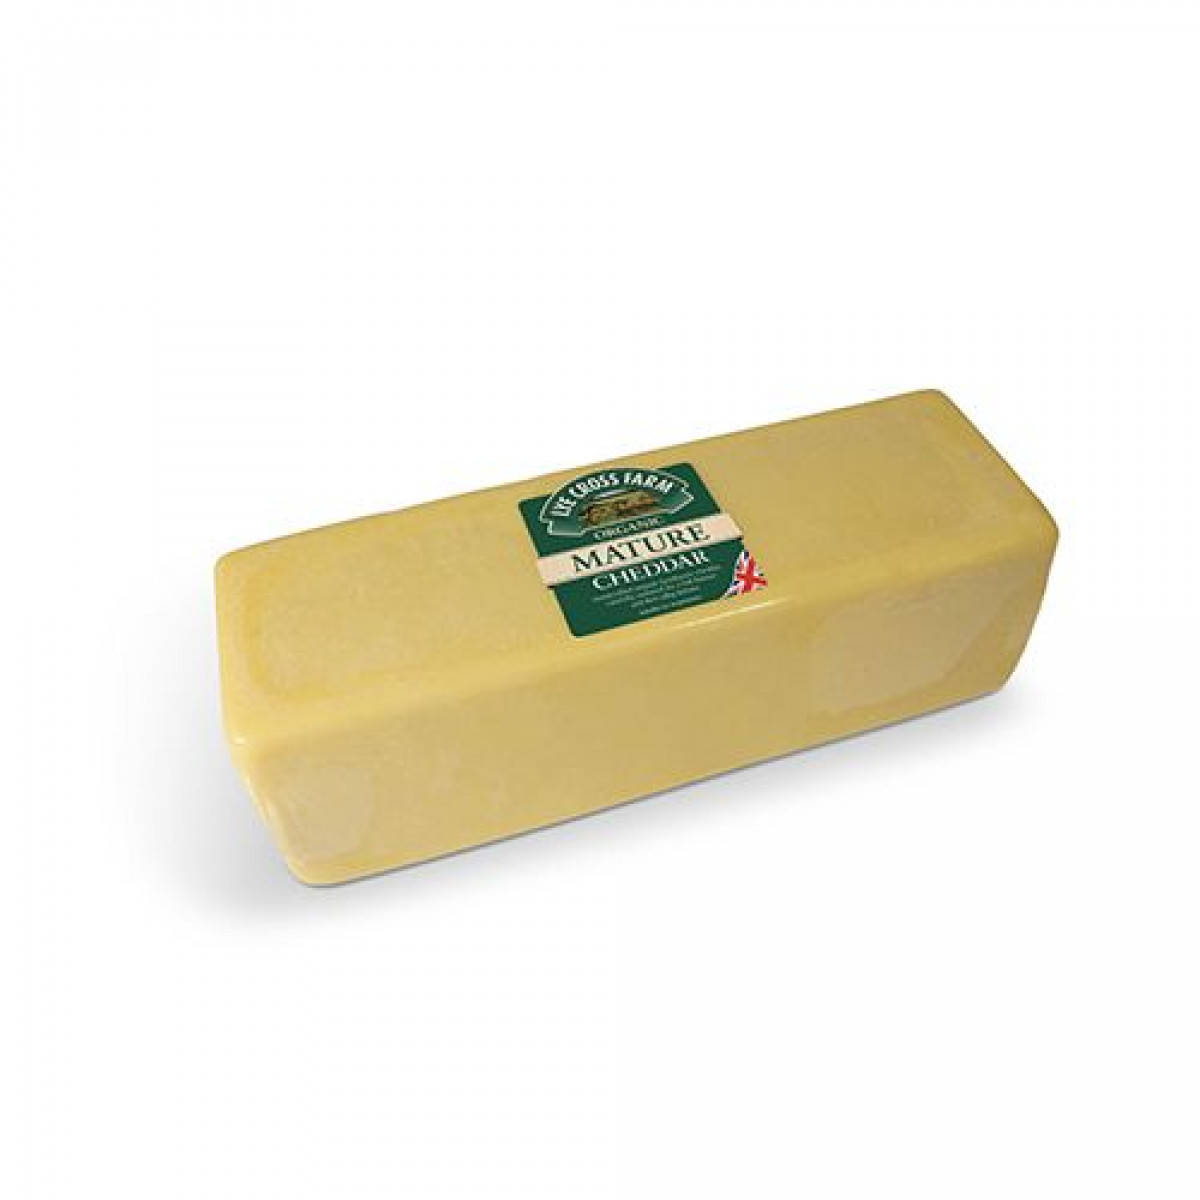 Product picture for Mature Cheddar Cheese